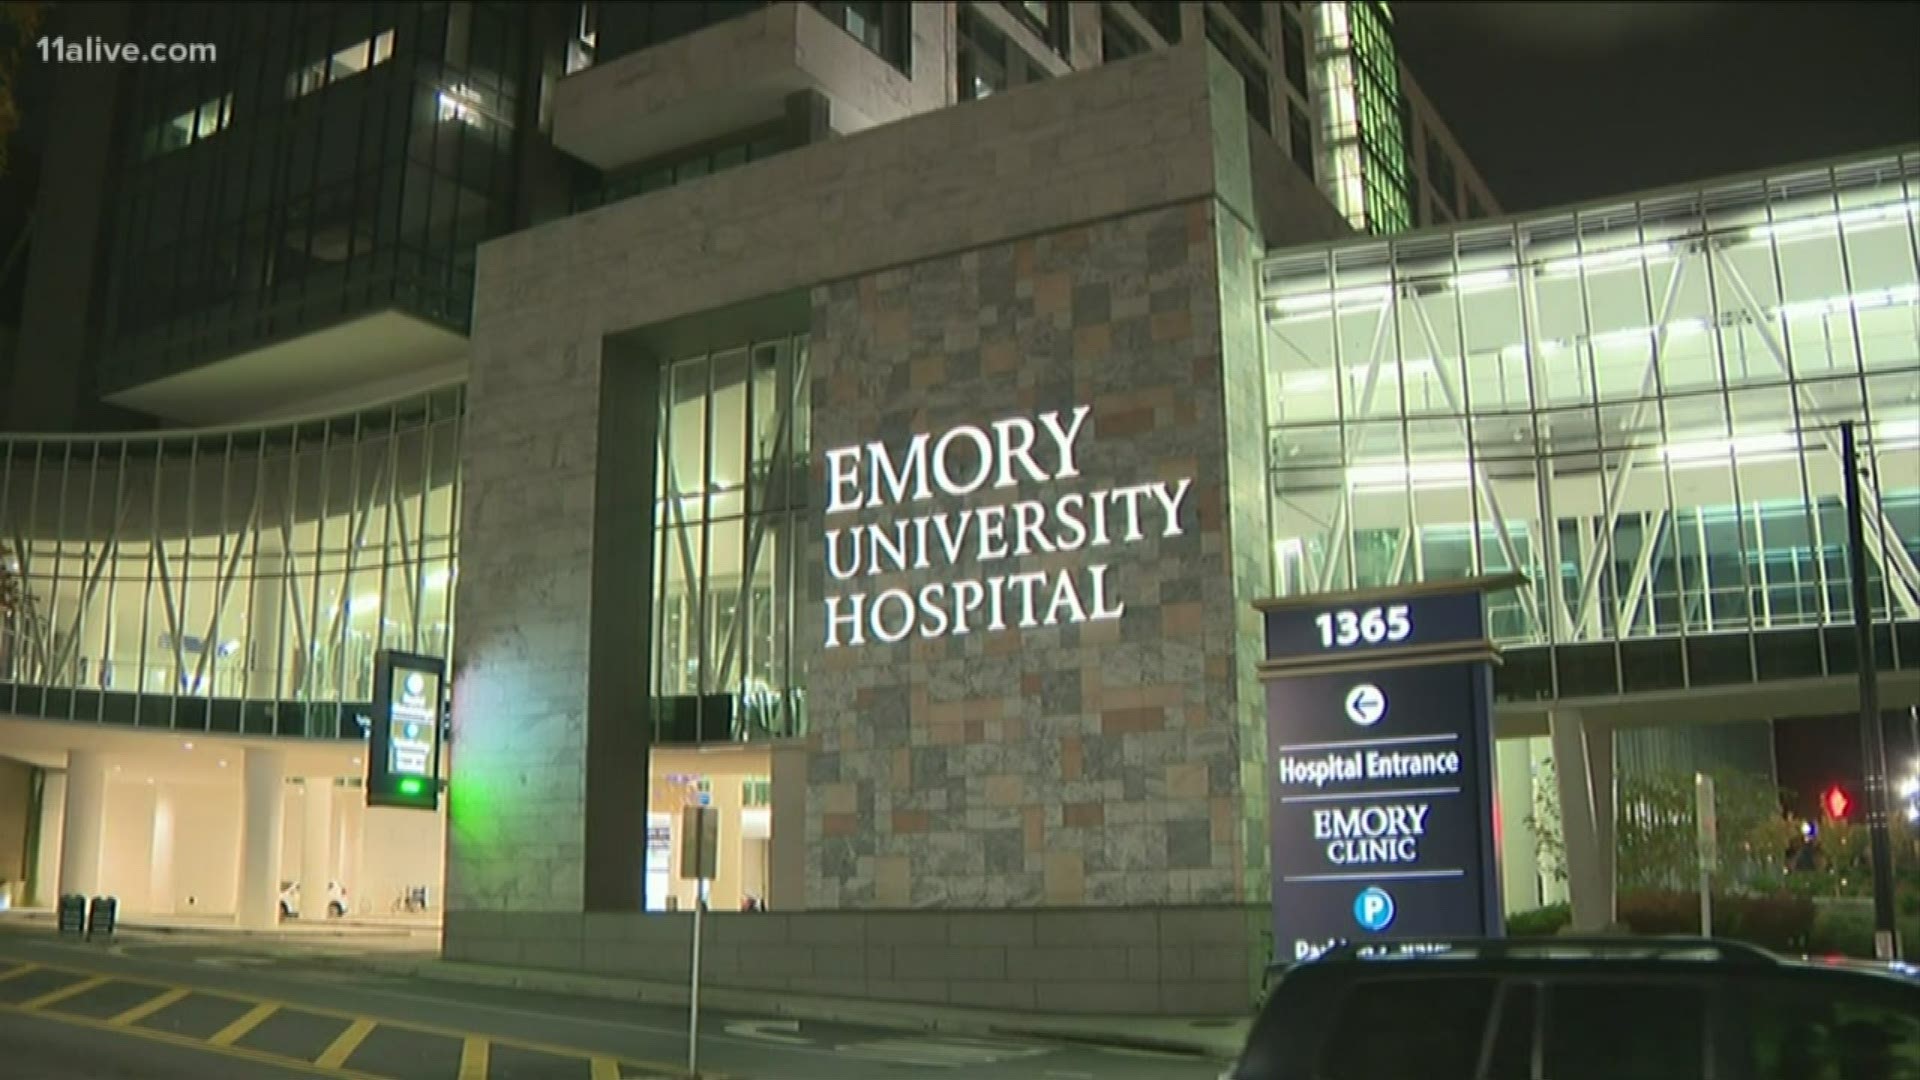 Emory said this is in an effort to protect patients and preserve supplies.